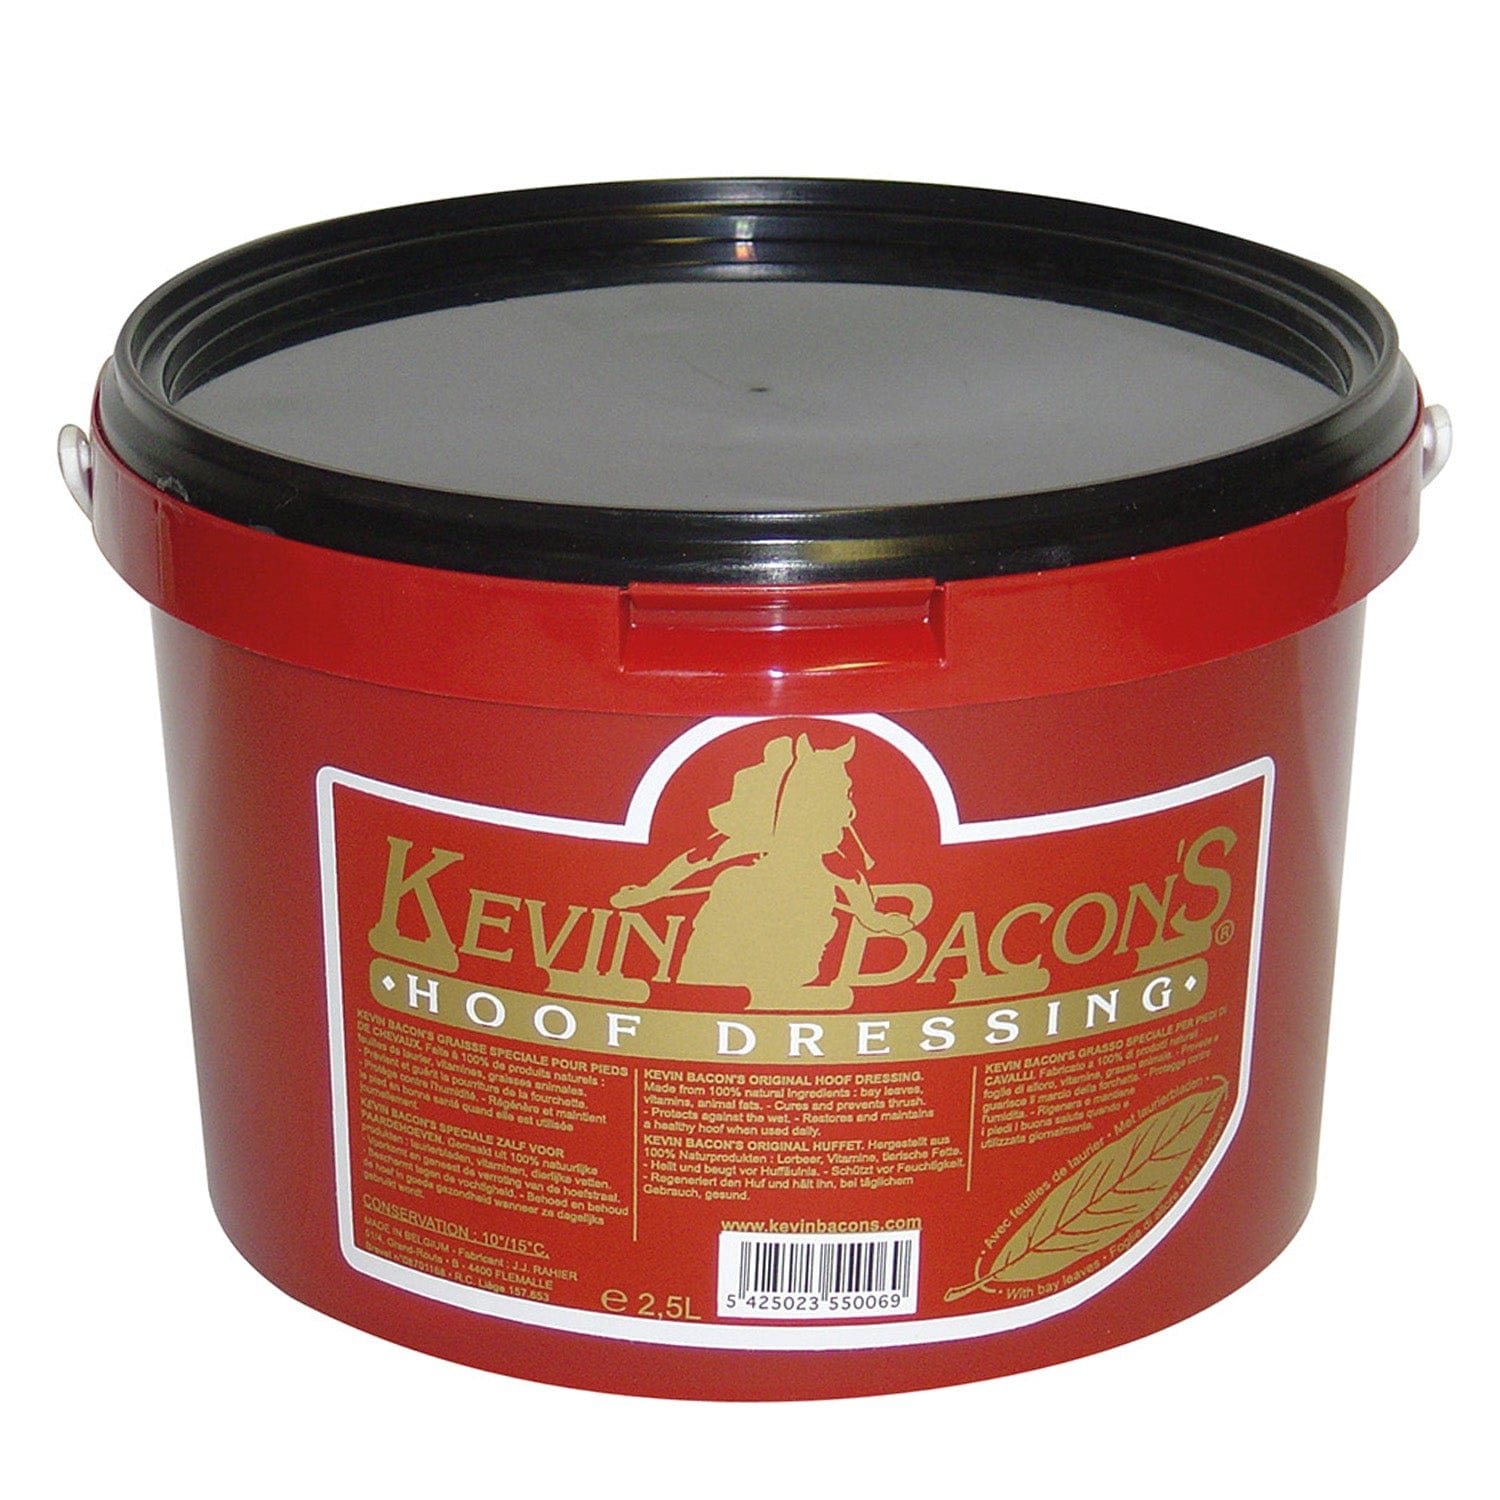 Kevin bacons hoof dressing with natural burnt ash